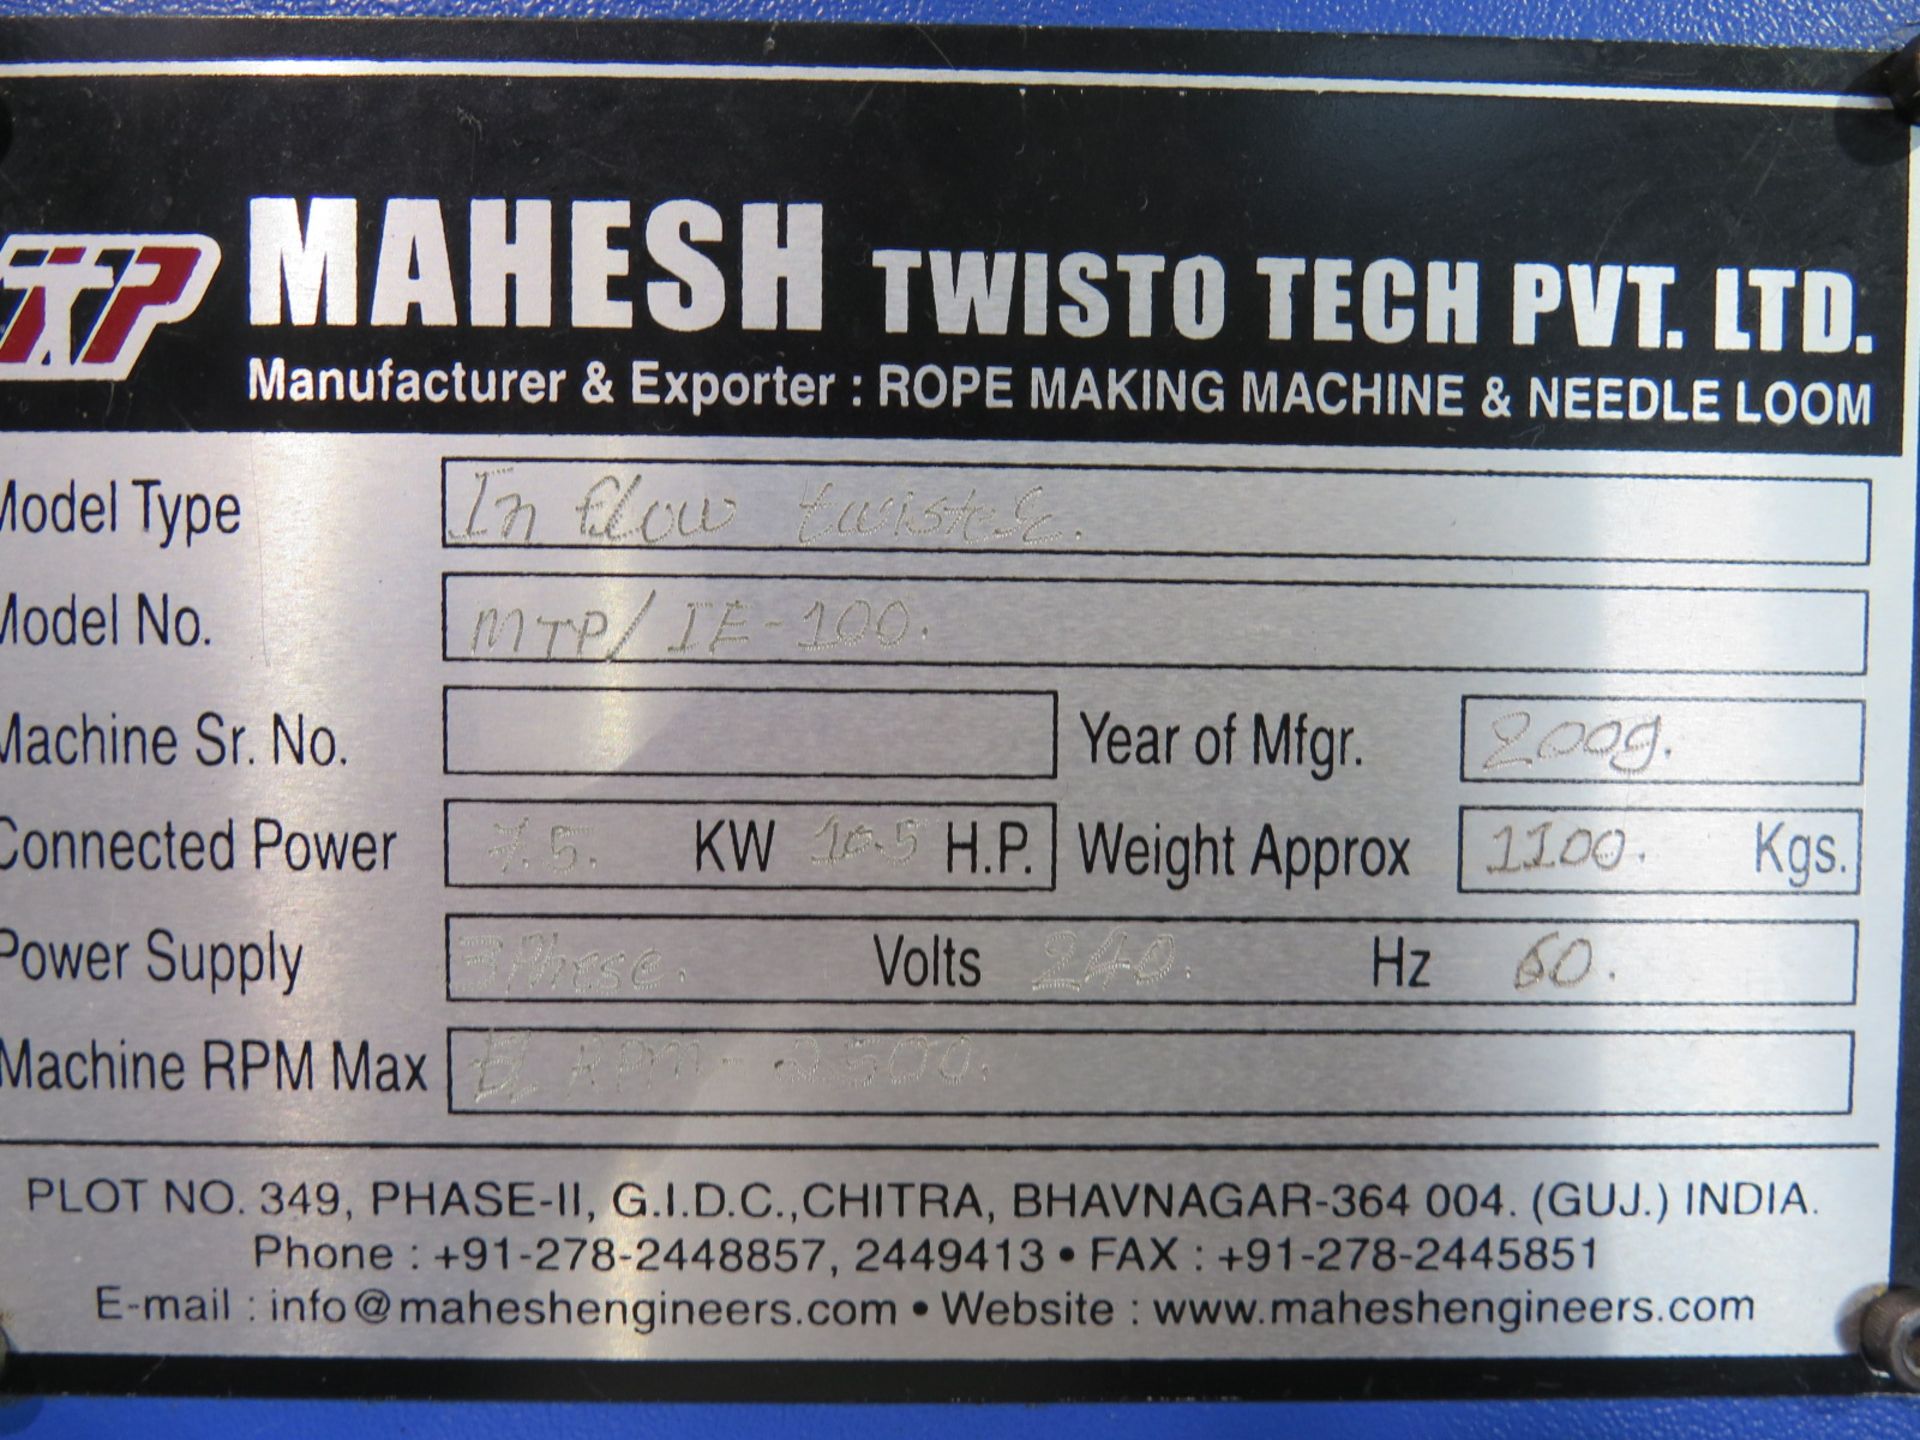 2009 Mahesh mdl. MTP/IE-100 "In Flow Twister" Filament Twister - Image 5 of 5